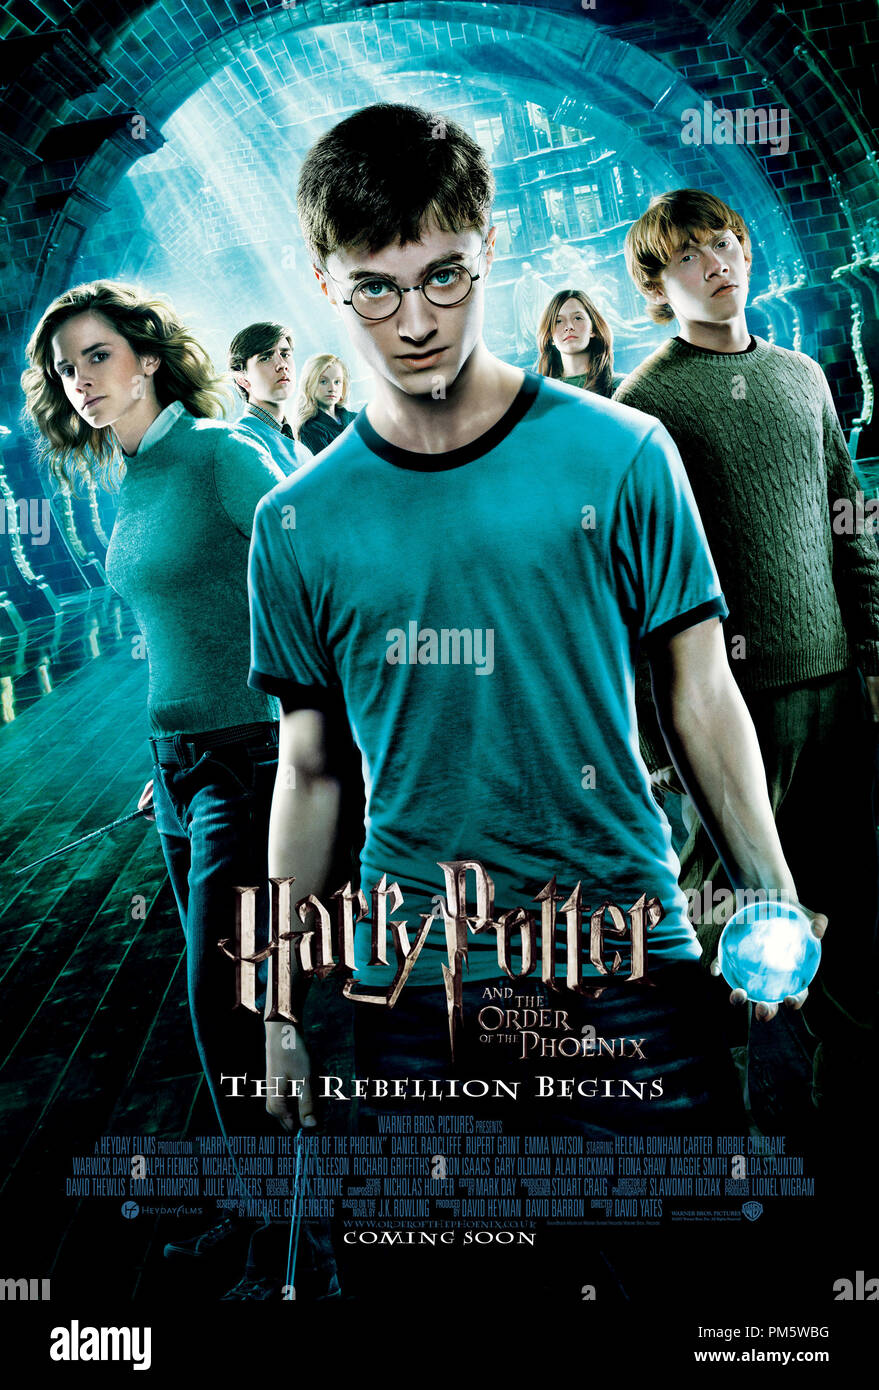 Harry Potter And The Order Of The Phoenix Poster 2007